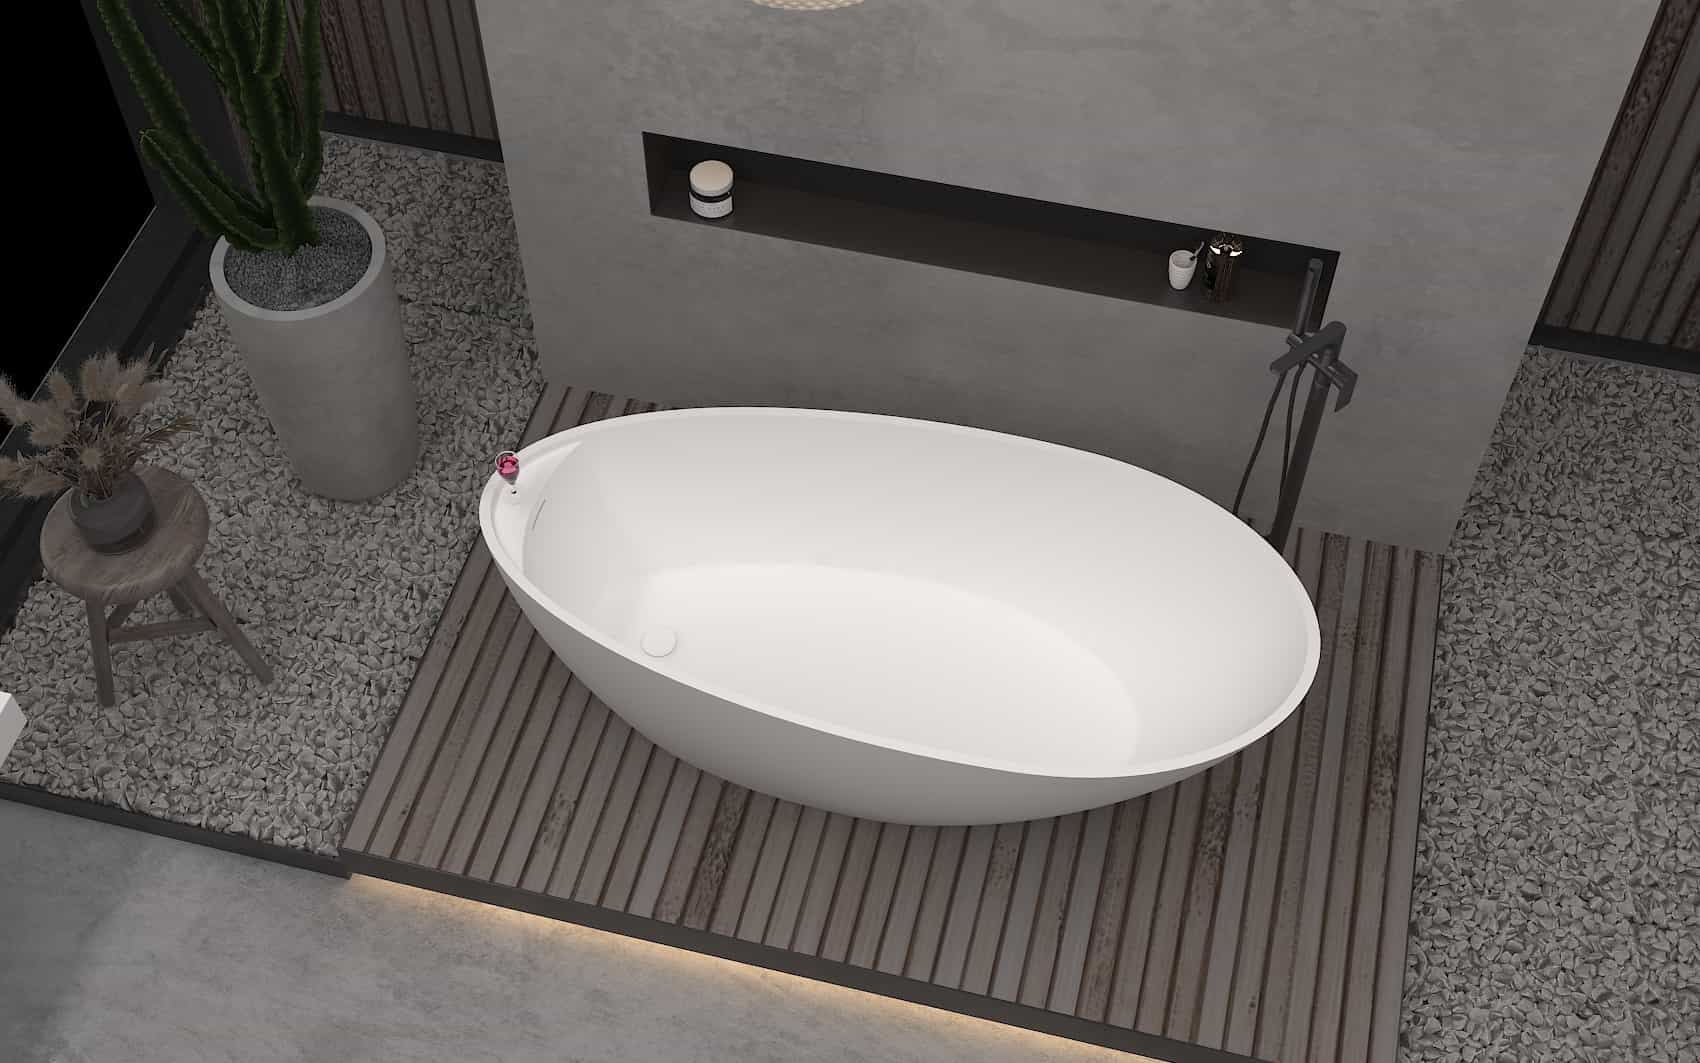 Matte White Composite Acrylic Oval Flat Bottom Freestanding bathtub Luxury Soaking Deep Large Bathroom Round Standing Tub with Built in Overflow and Drain Square Shape Lilya 2130210